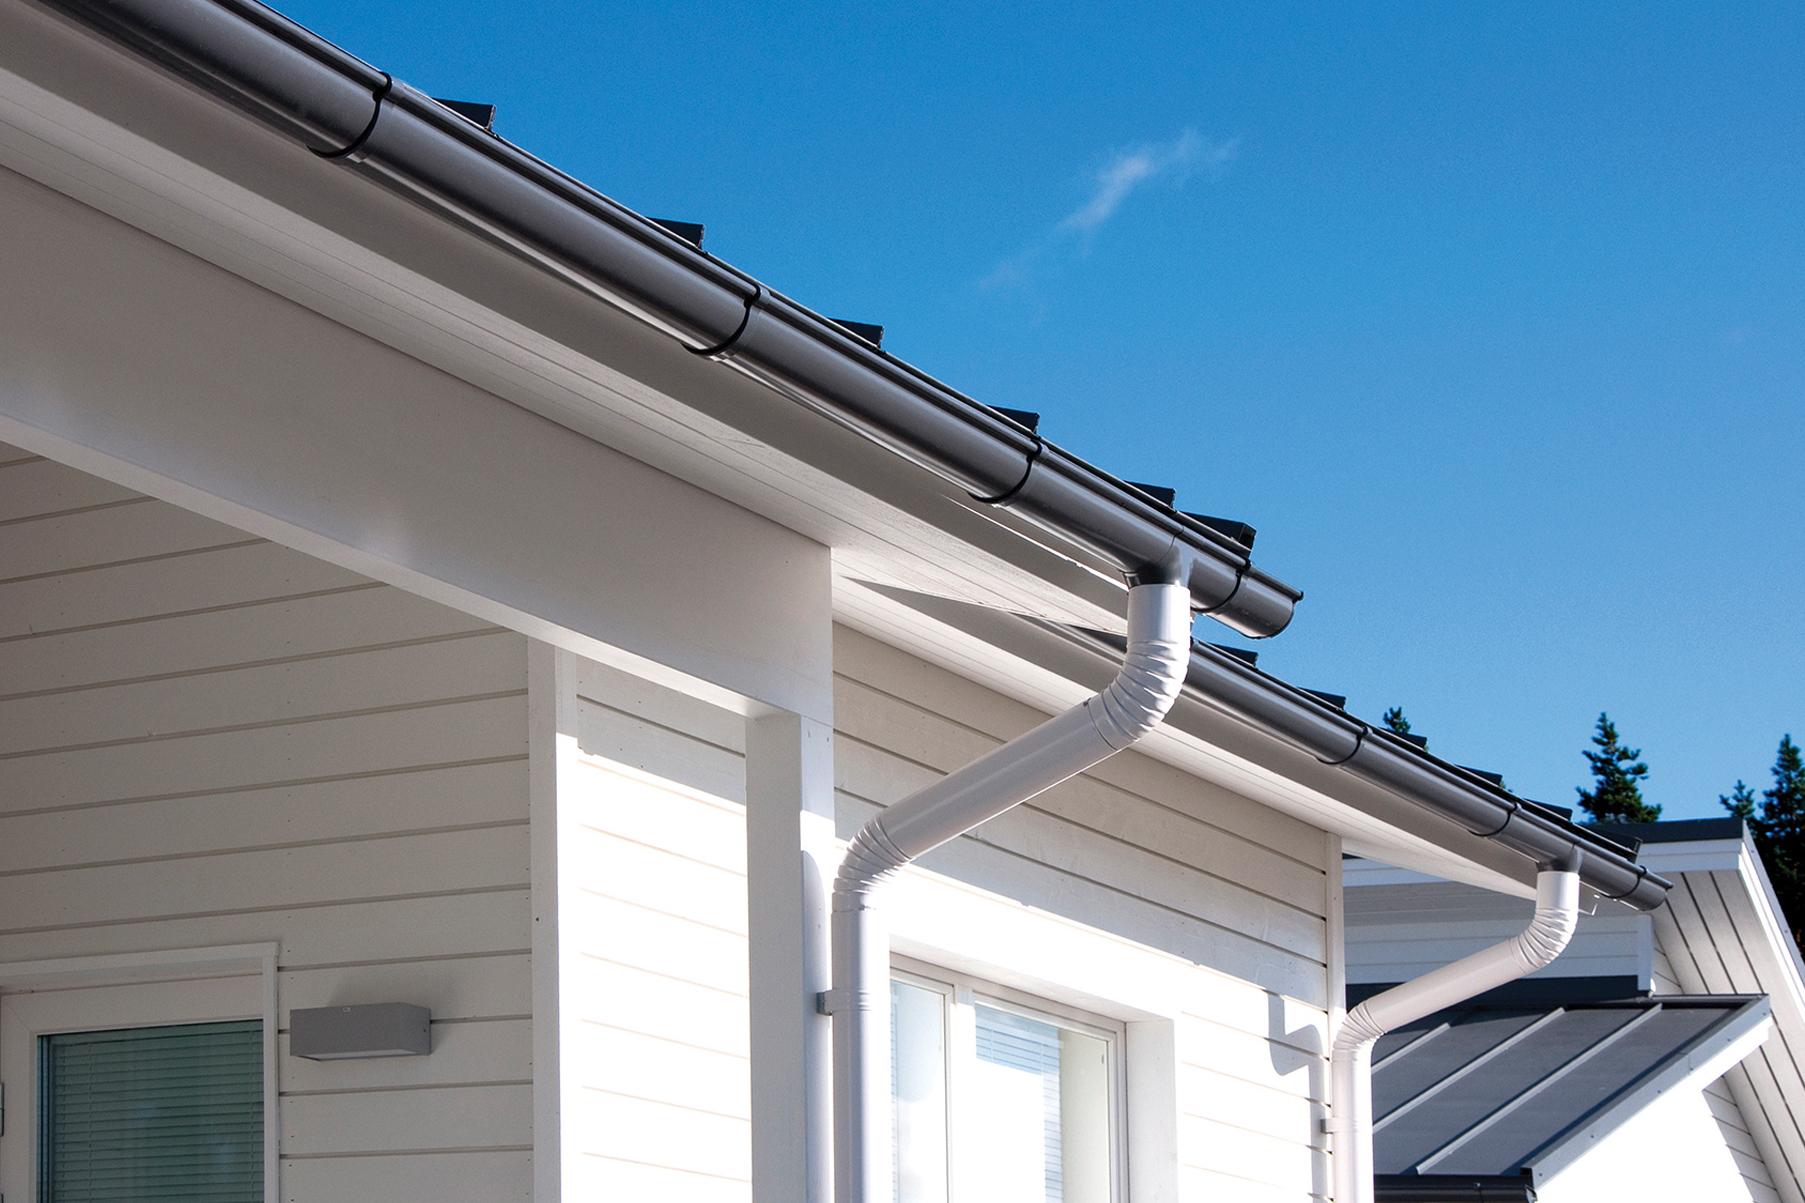 Pisko gutters are available in all roof and façade colors.